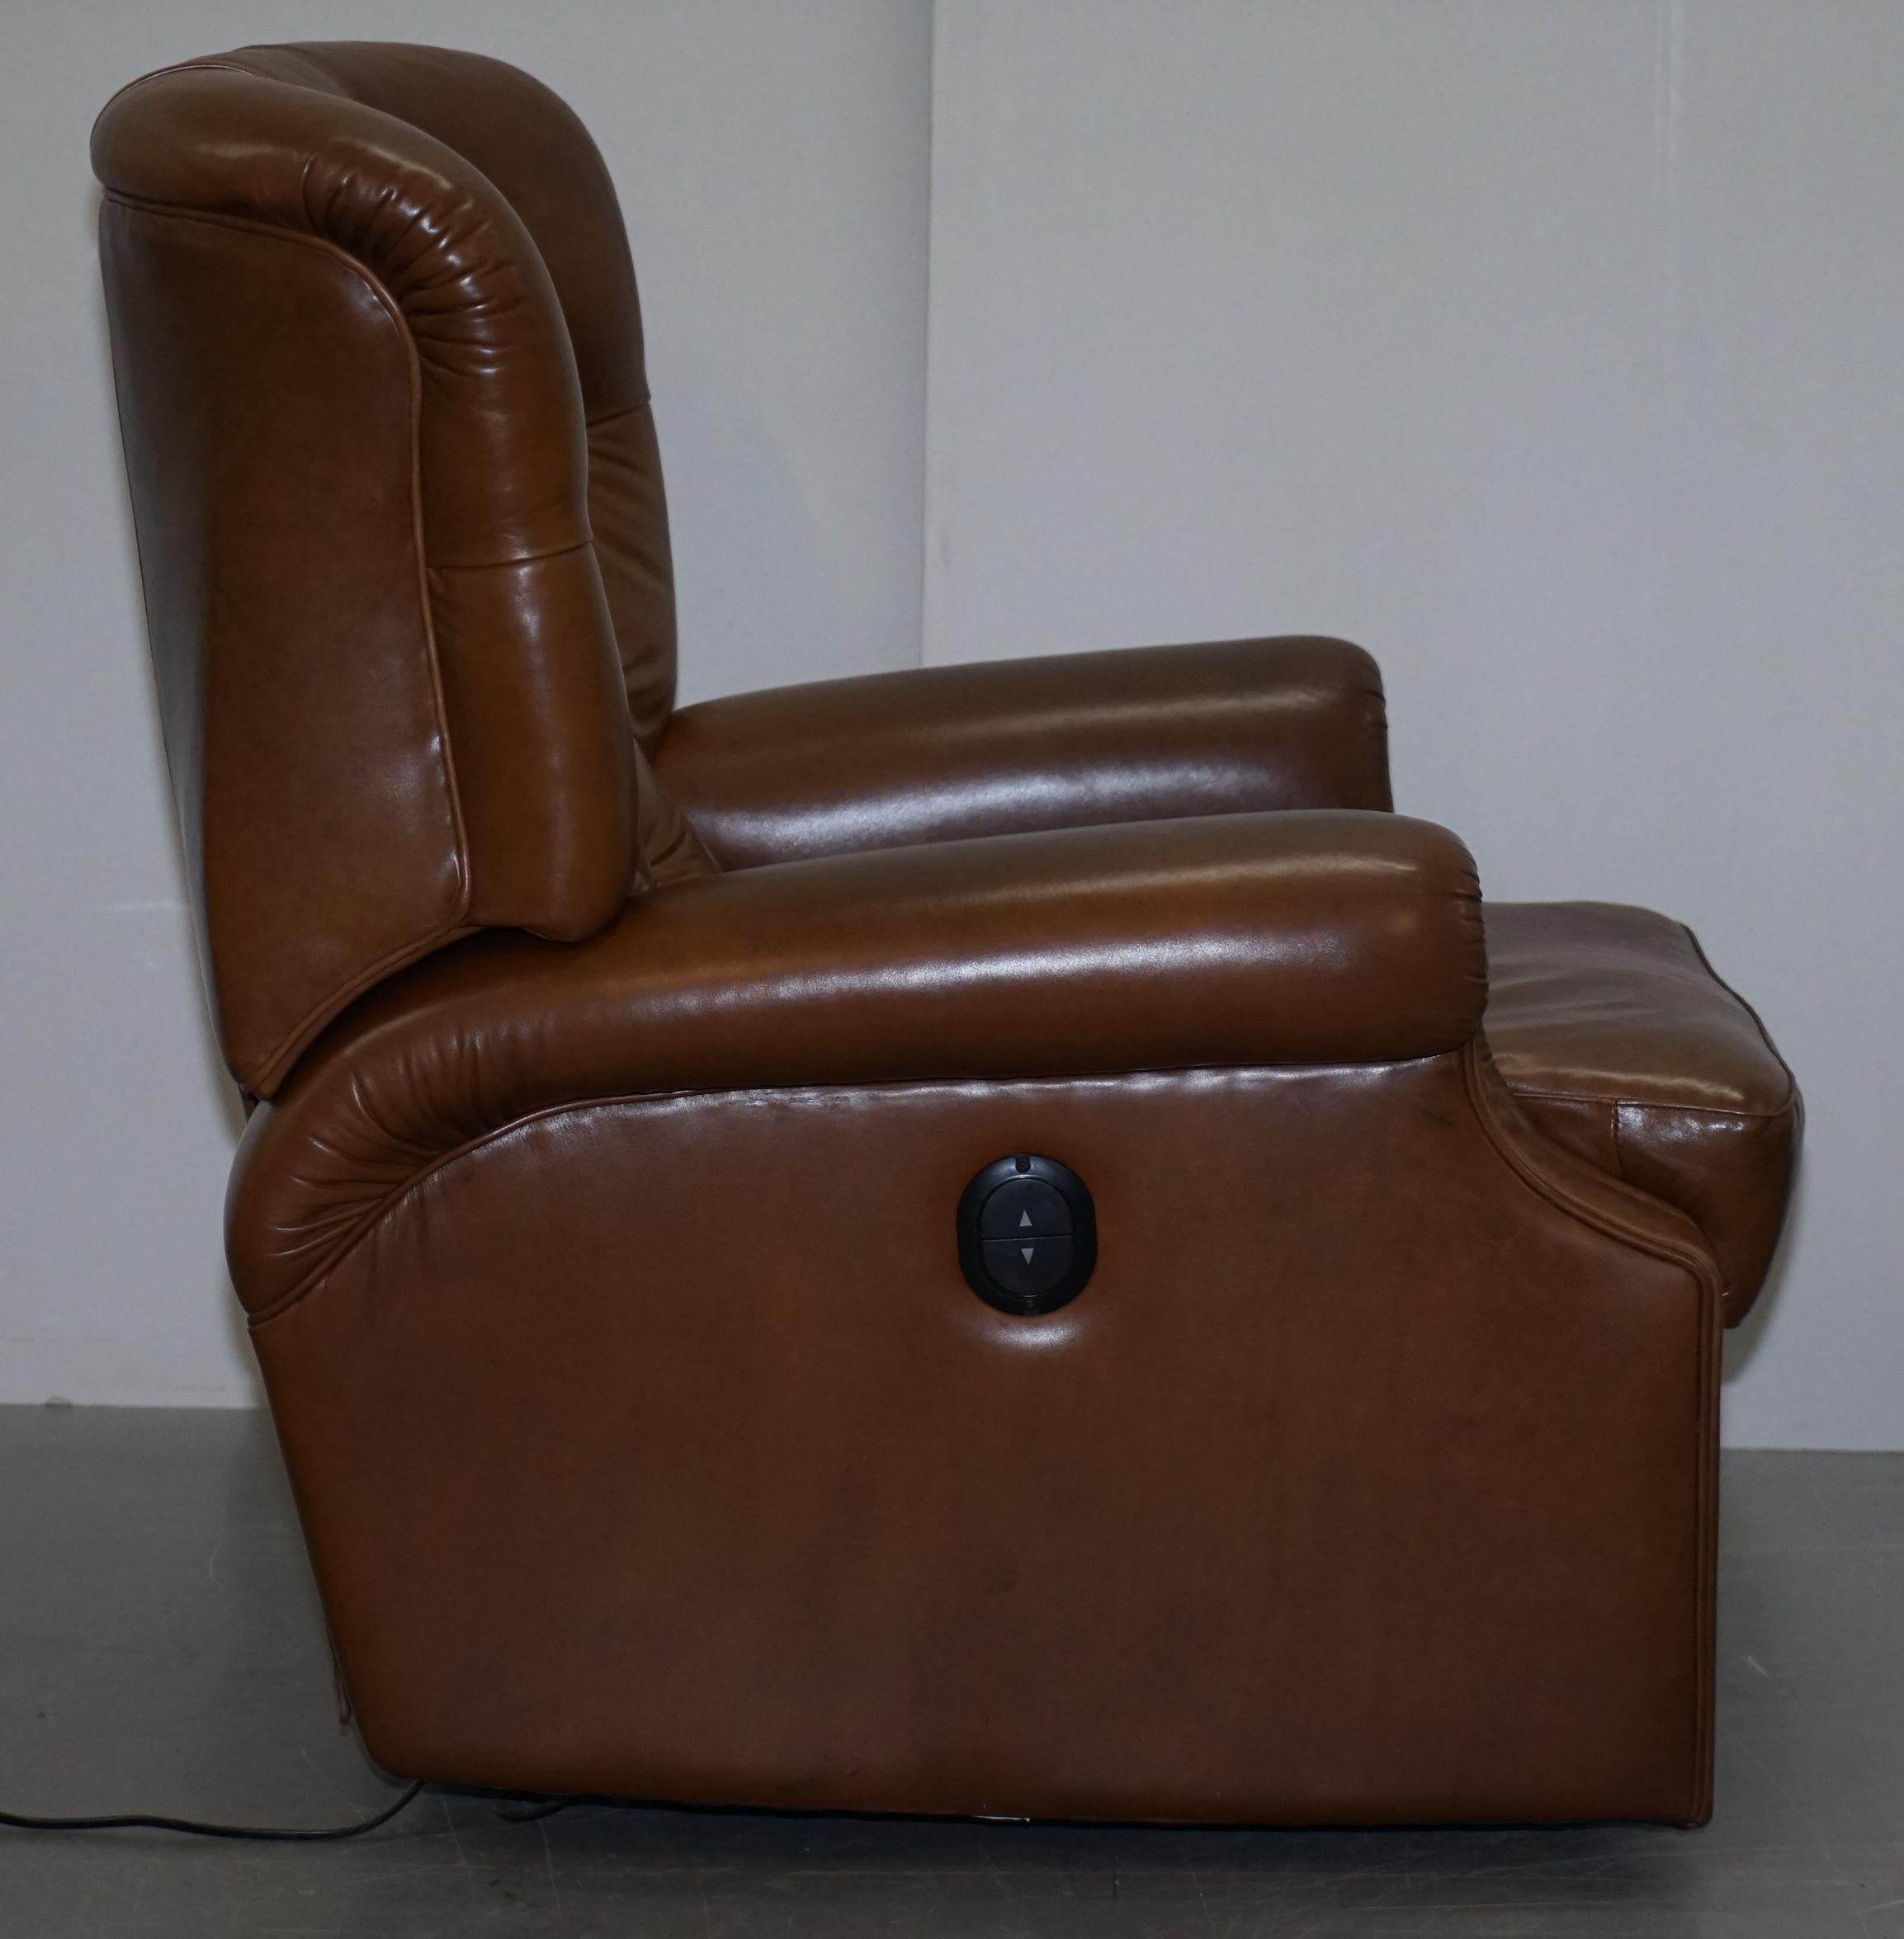 Lovely Tan Brown Leather Chesterfield Electric Relciner Armchair Comfortable!!!! 4